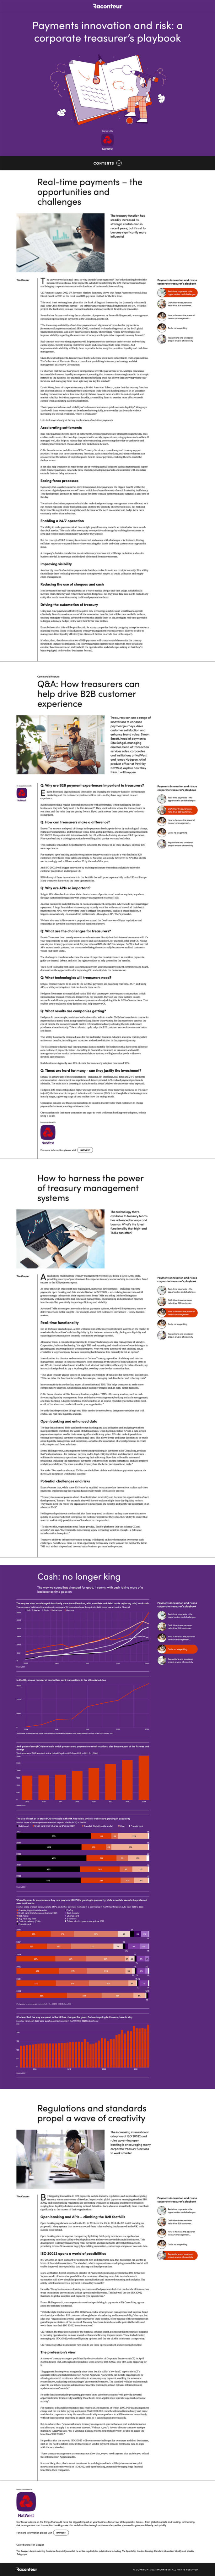 Payments innovation and risk: a corporate treasurer’s playbook